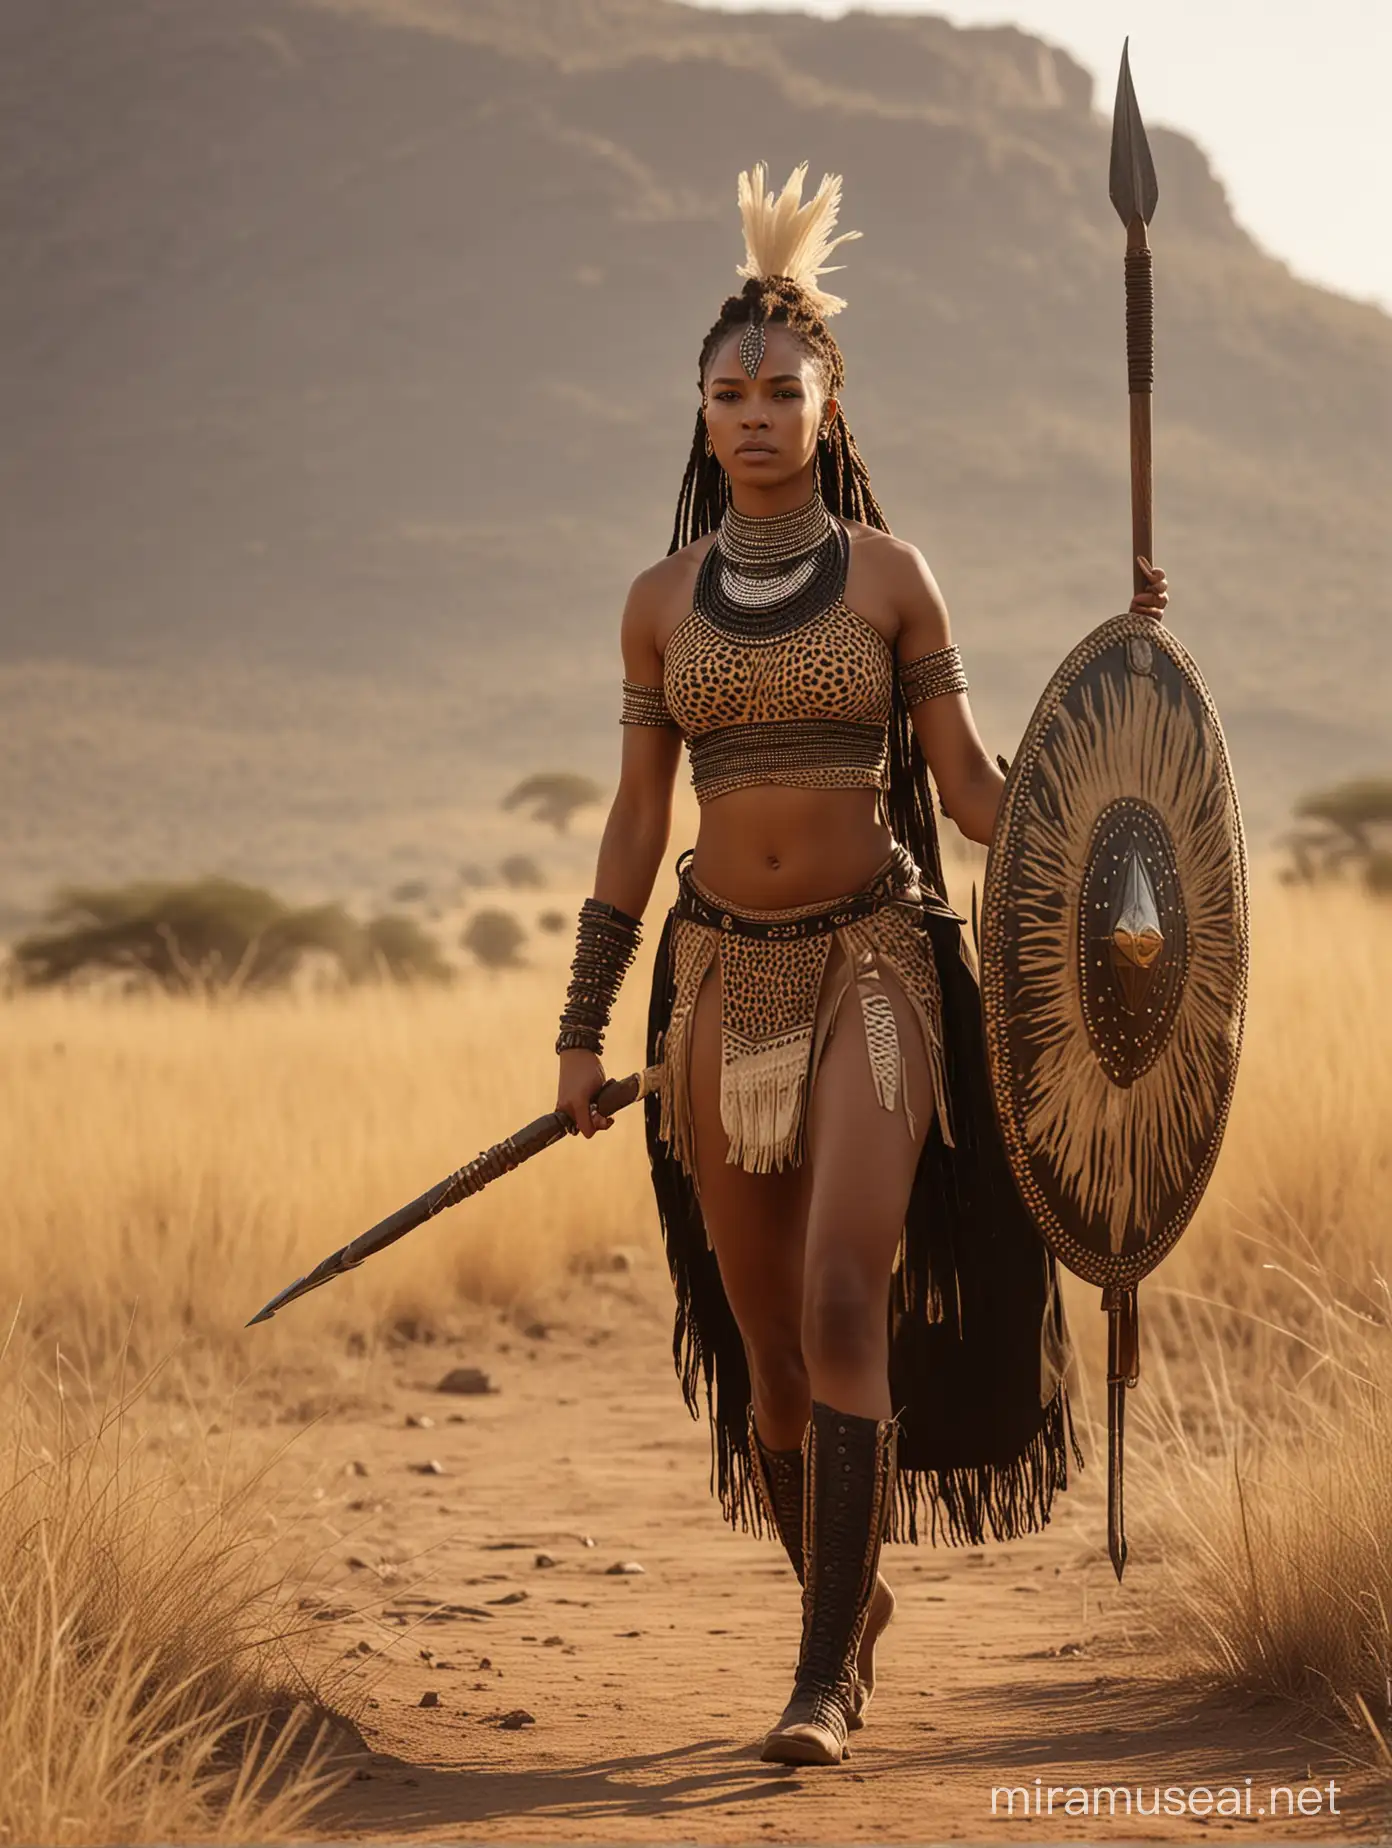 African Zulu Warrior Woman Walking in Savannah with Spear and Shield